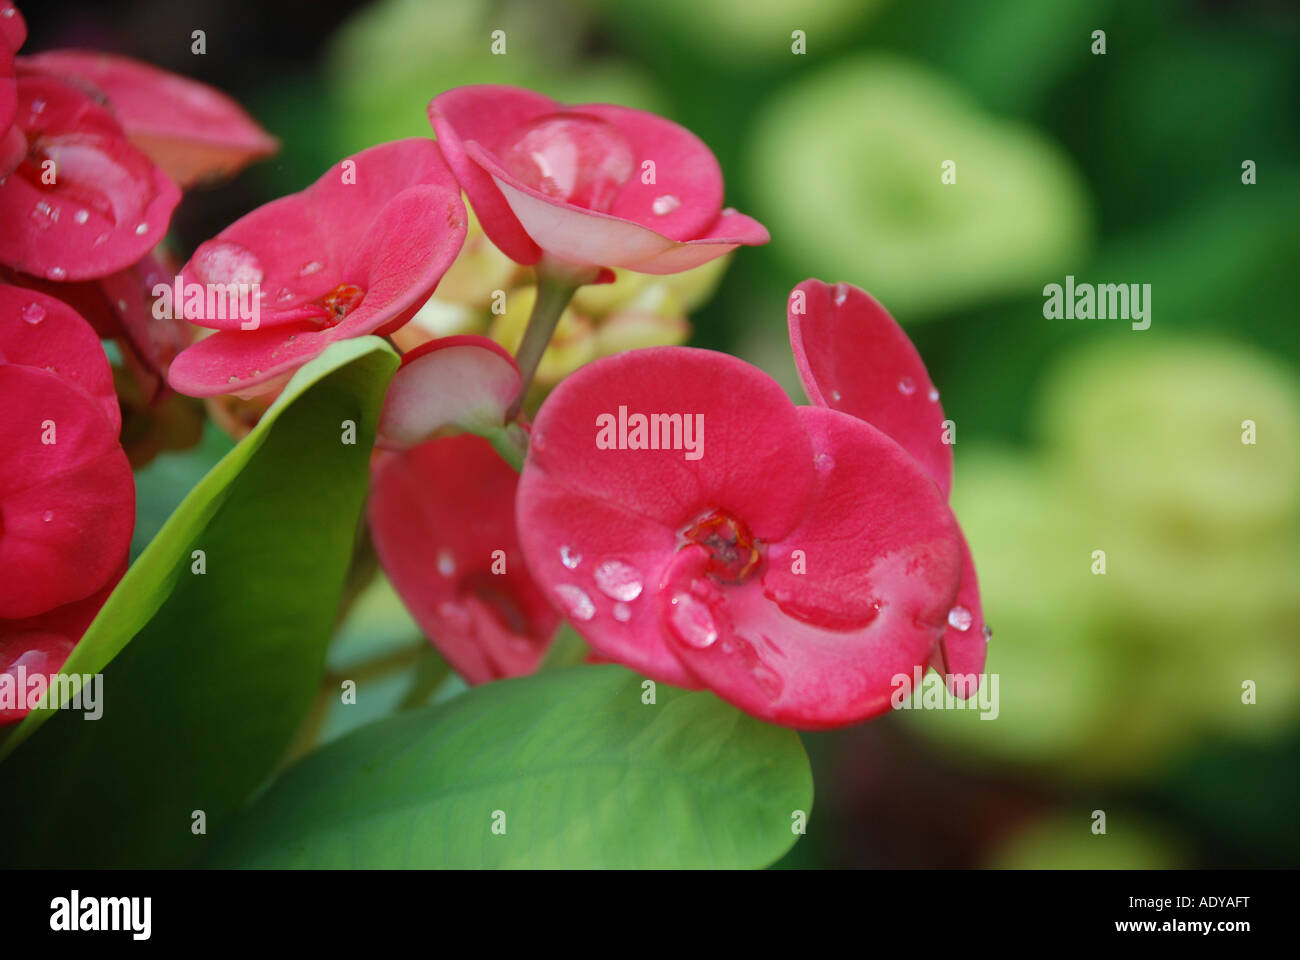 waterdrops on top petals in red flower Stock Photo